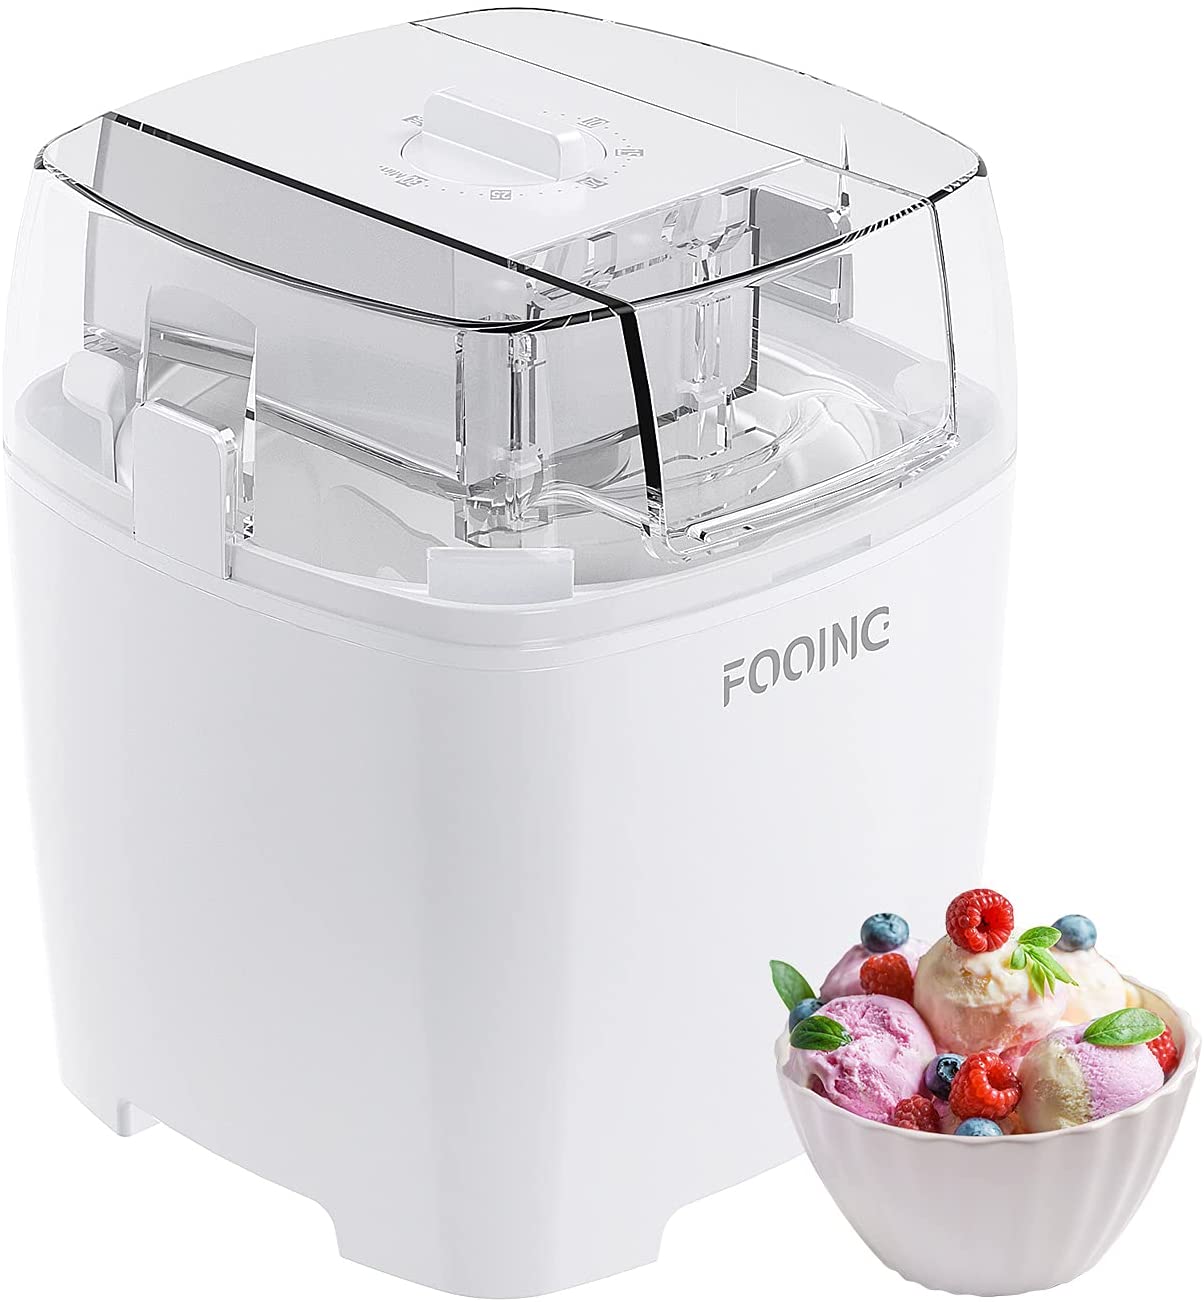 FOOING Ice Cream Maker 1.5 L with Rotary Knob (5 to 30 Minutes), Stainless Steel Home Ice Cream Machine, Suitable for Sorbet, Frozen Yoghurt and Ice Cream, Includes Recipe and Paper Cups